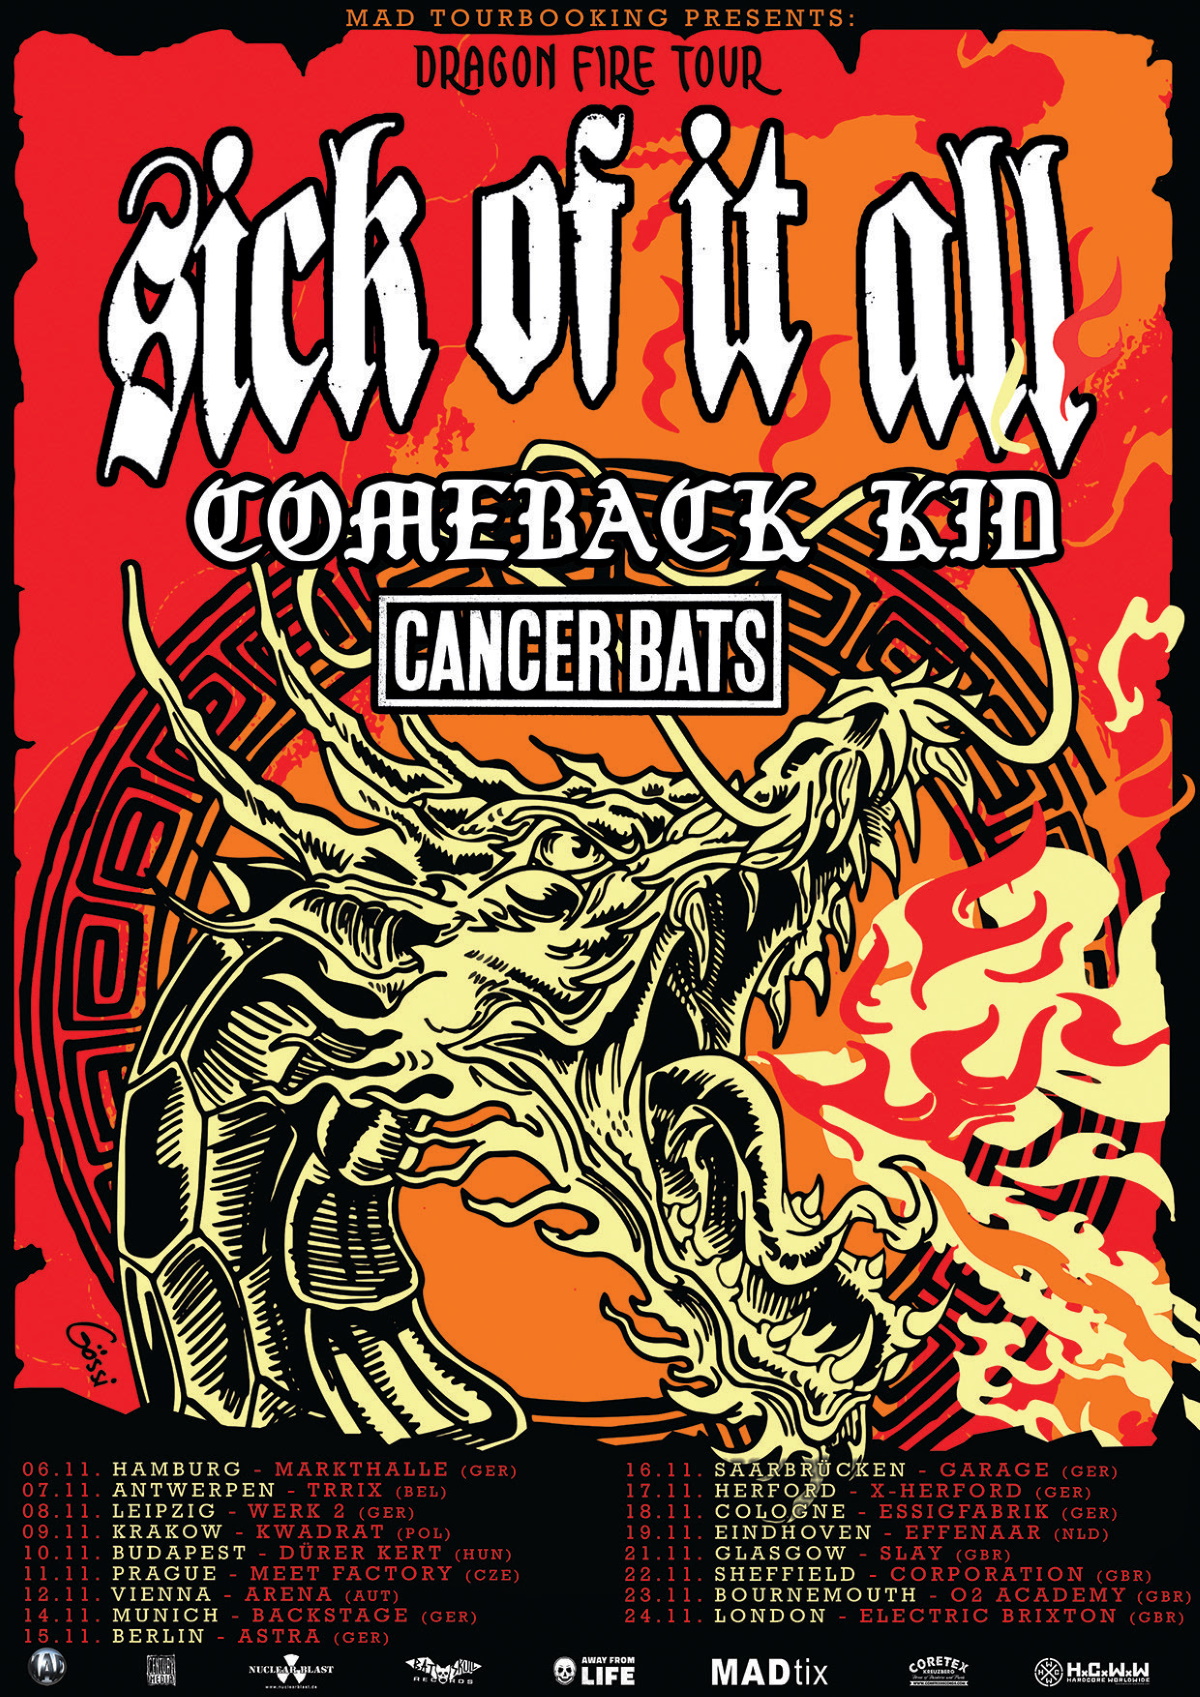 COMEBACK KID poster updated